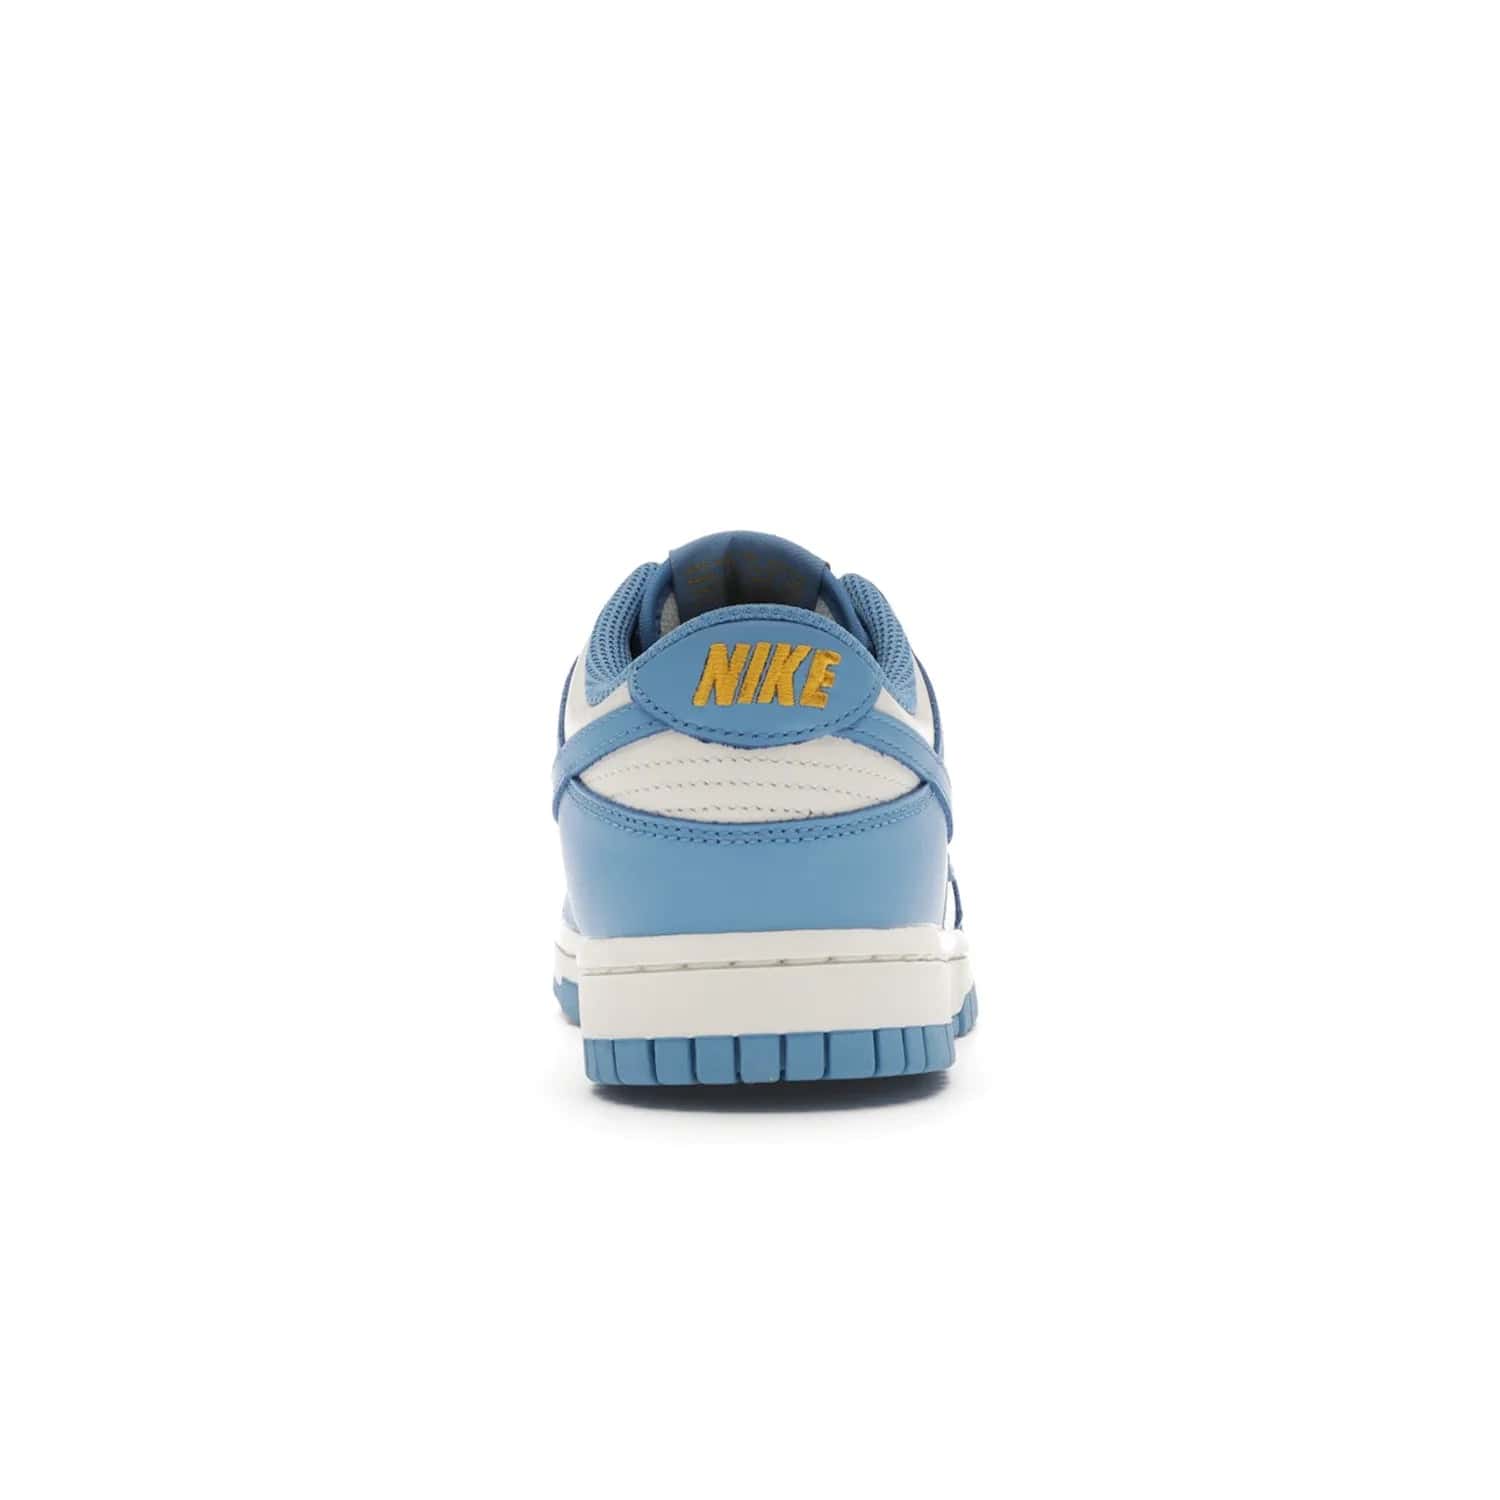 Nike Dunk Low Coast (Women's) - Image 28 - Only at www.BallersClubKickz.com - Iconic UCLA colors honor the west coast with the Nike Dunk Low Coast (Women's), a bold combo of light blue, white and yellow. Light leather upper with white midsole and light EVA outsole offer a modern twist. Released Feb 2021 for $100.